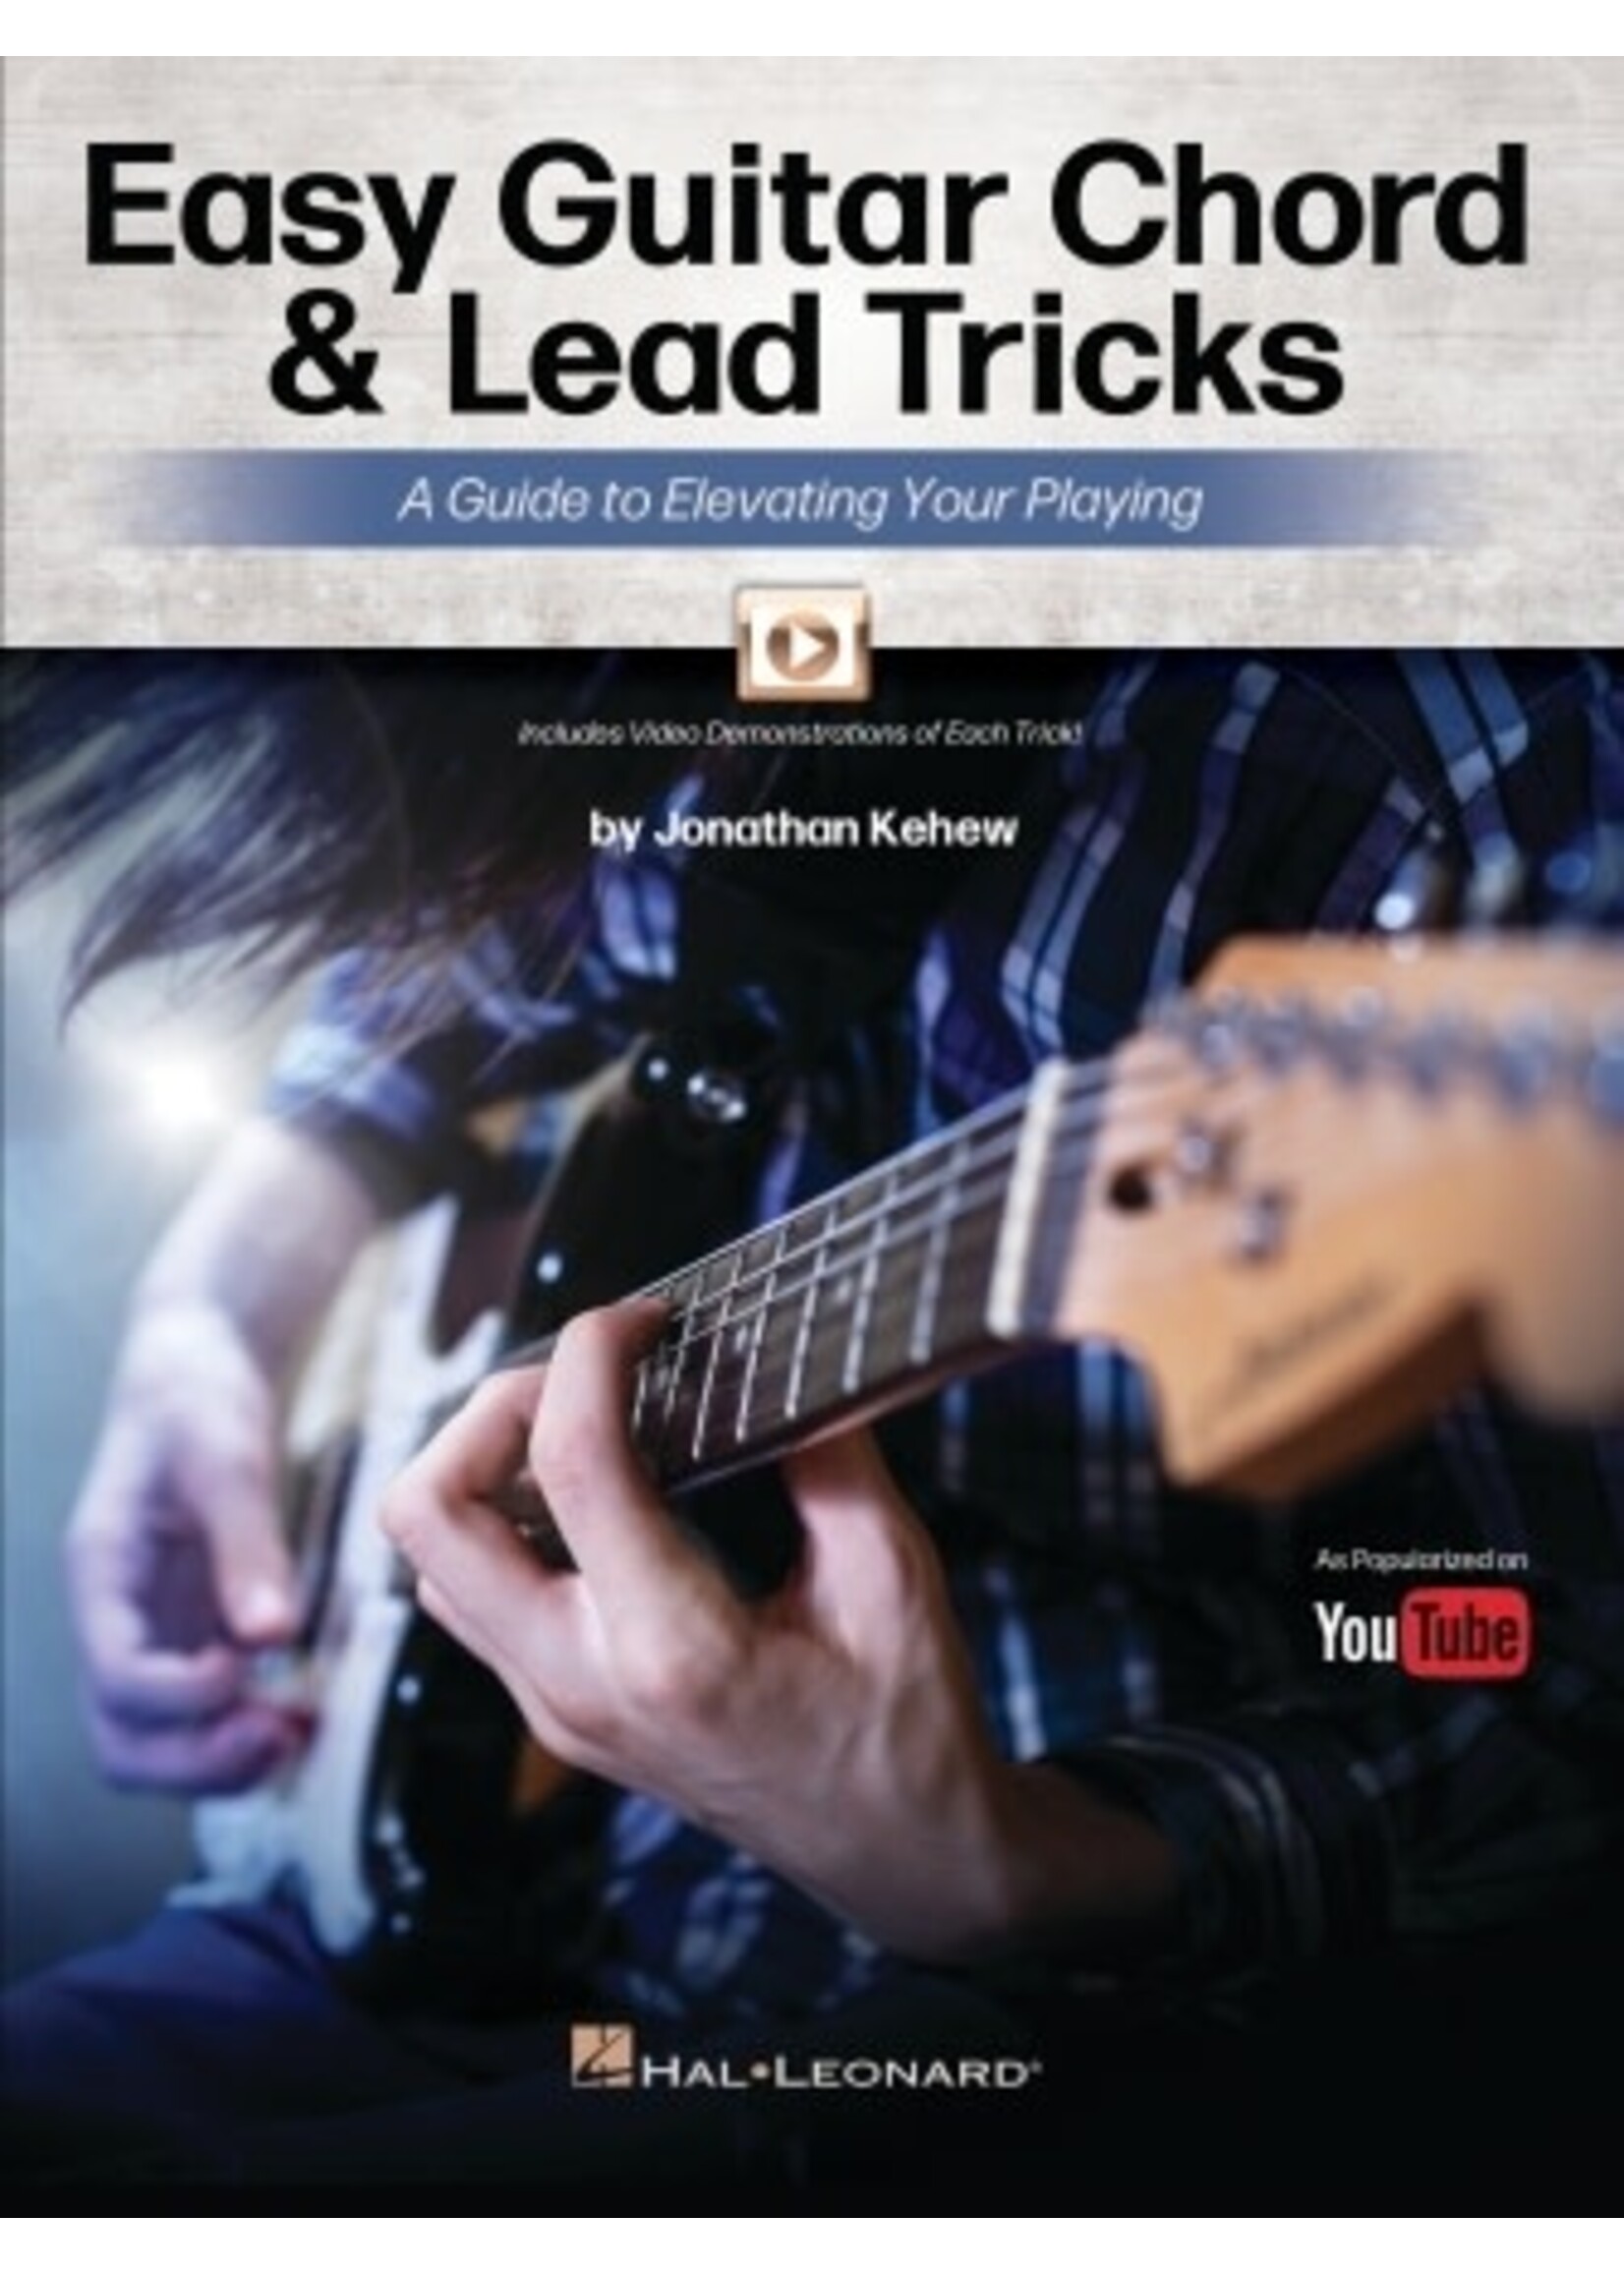 Hal Leonard Easy Guitar Chord & Lead Tricks - A Guide to Elevating Your Playing